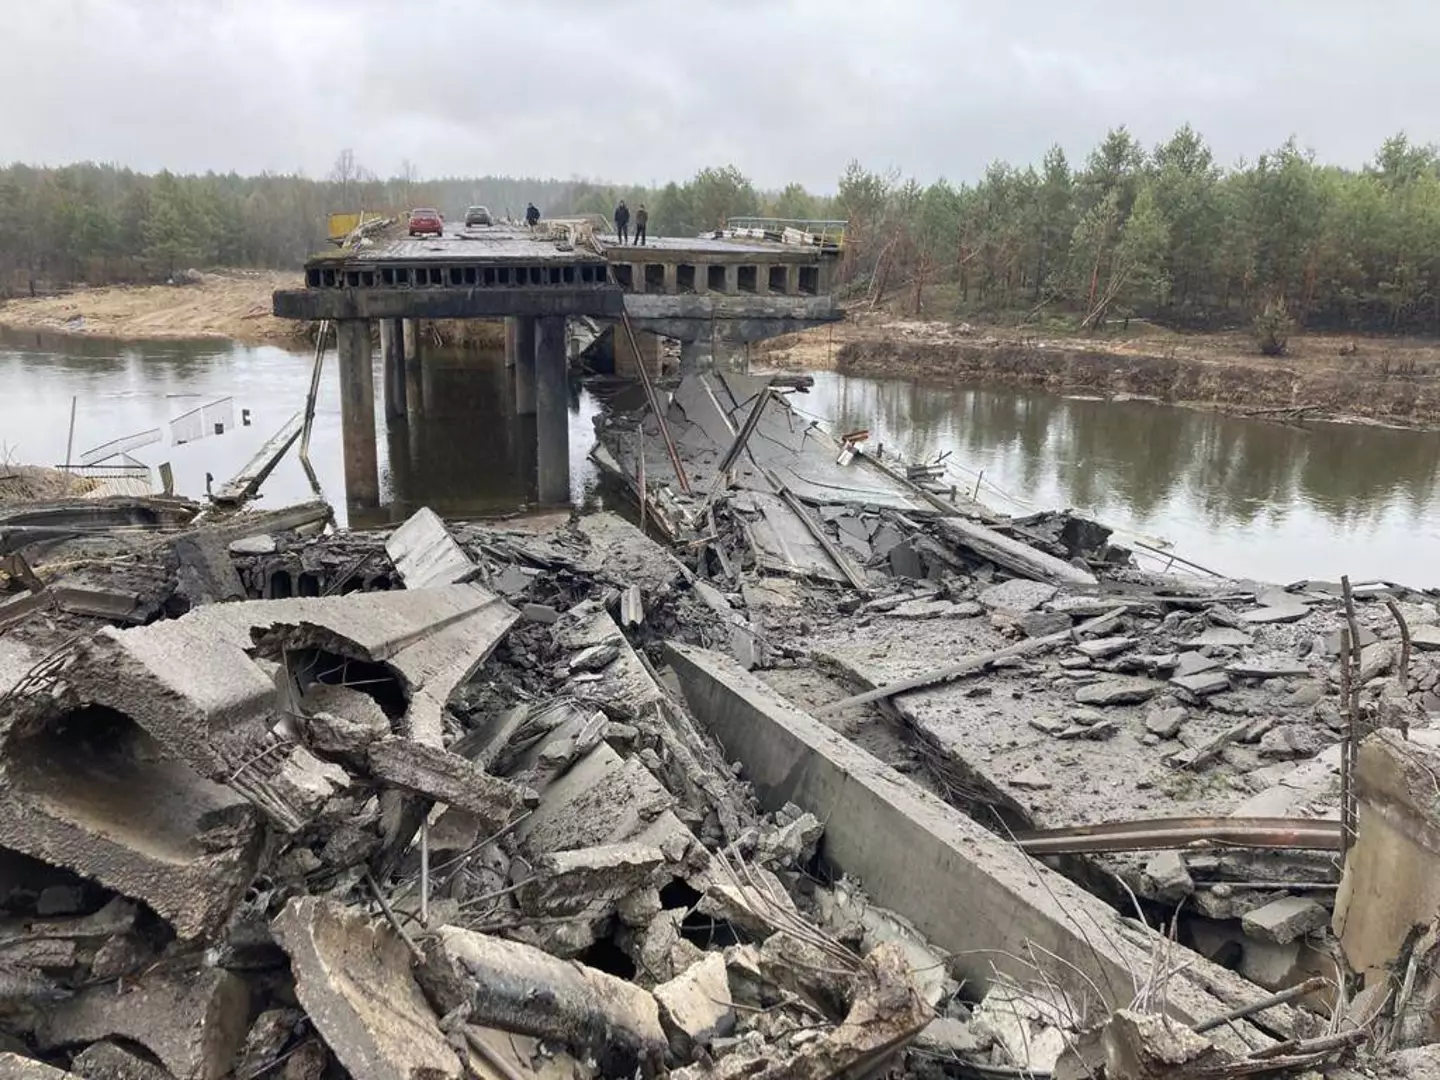 The first photo showed a bridge allegedly destroyed by Russian forces.